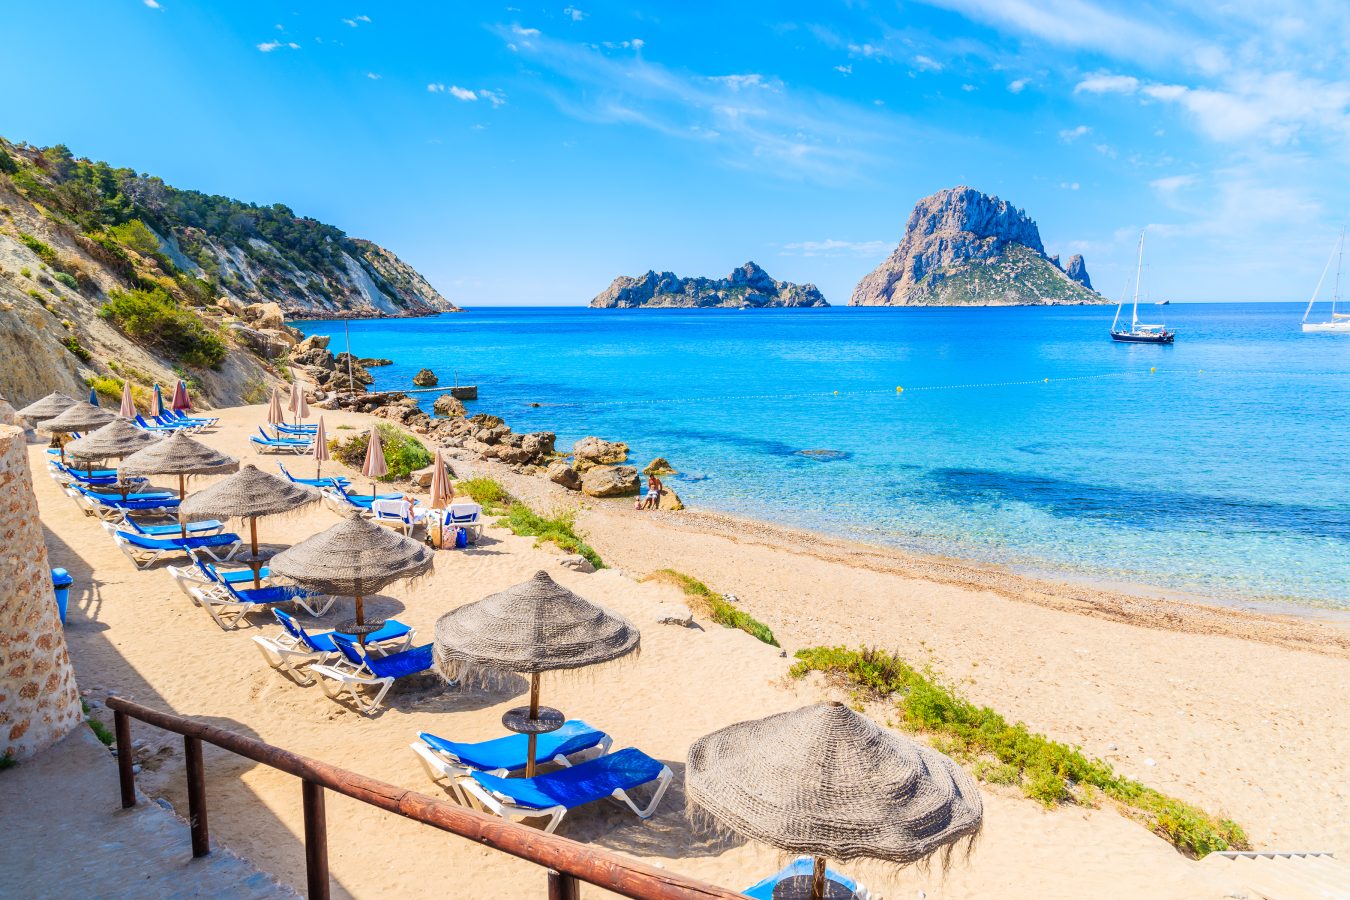 View of Cala d'Hort beach with sunbeds and umbrellas and beautiful azure blue sea water, Ibiza island, Spain (one of the best spring break destinations).